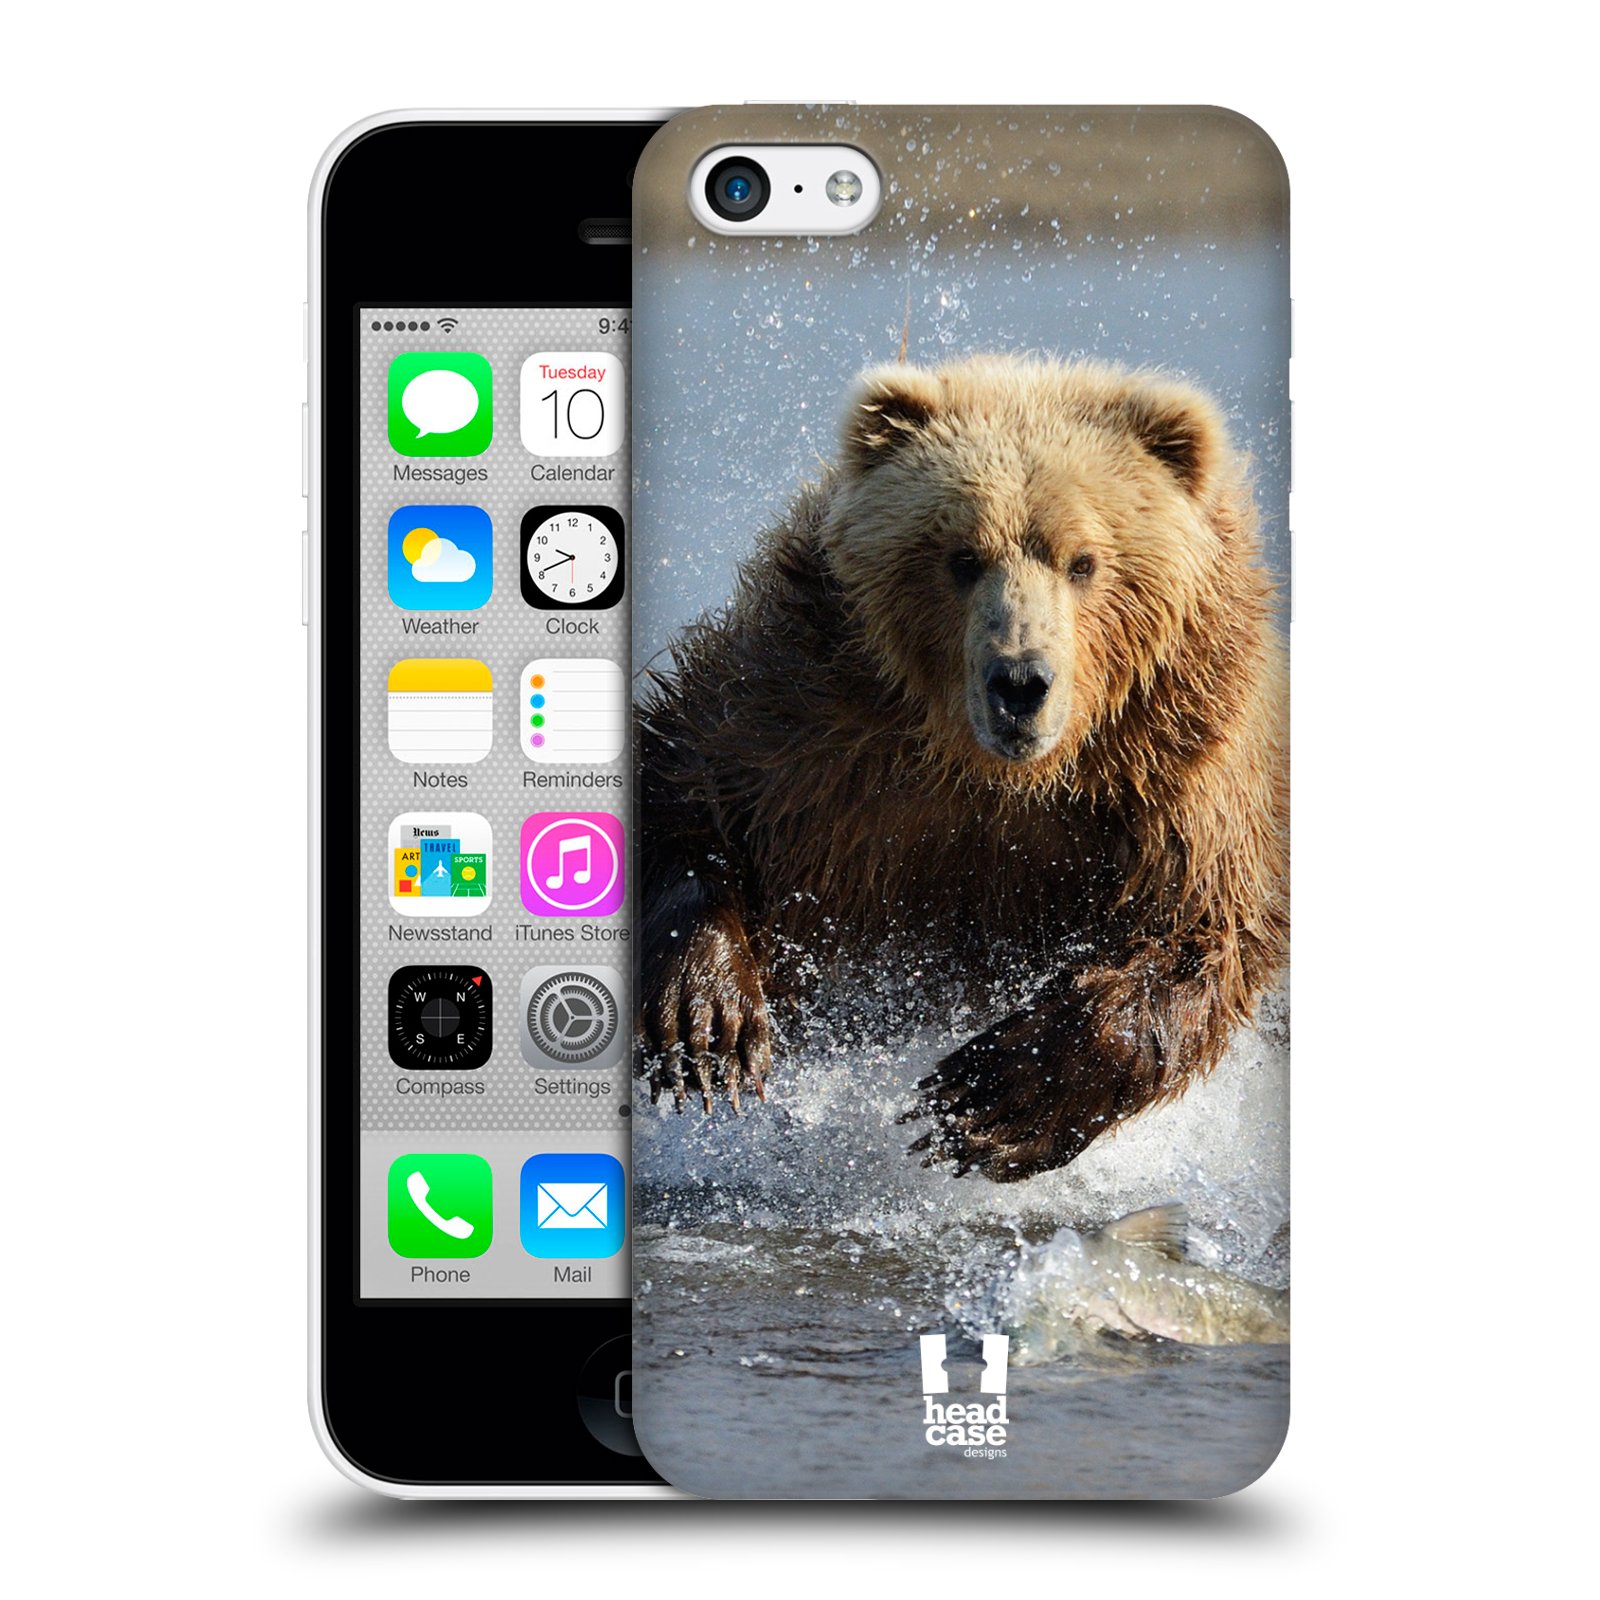 HEAD CASE WILDLIFE PROTECTIVE SNAP-ON HARD BACK CASE COVER FOR APPLE ...